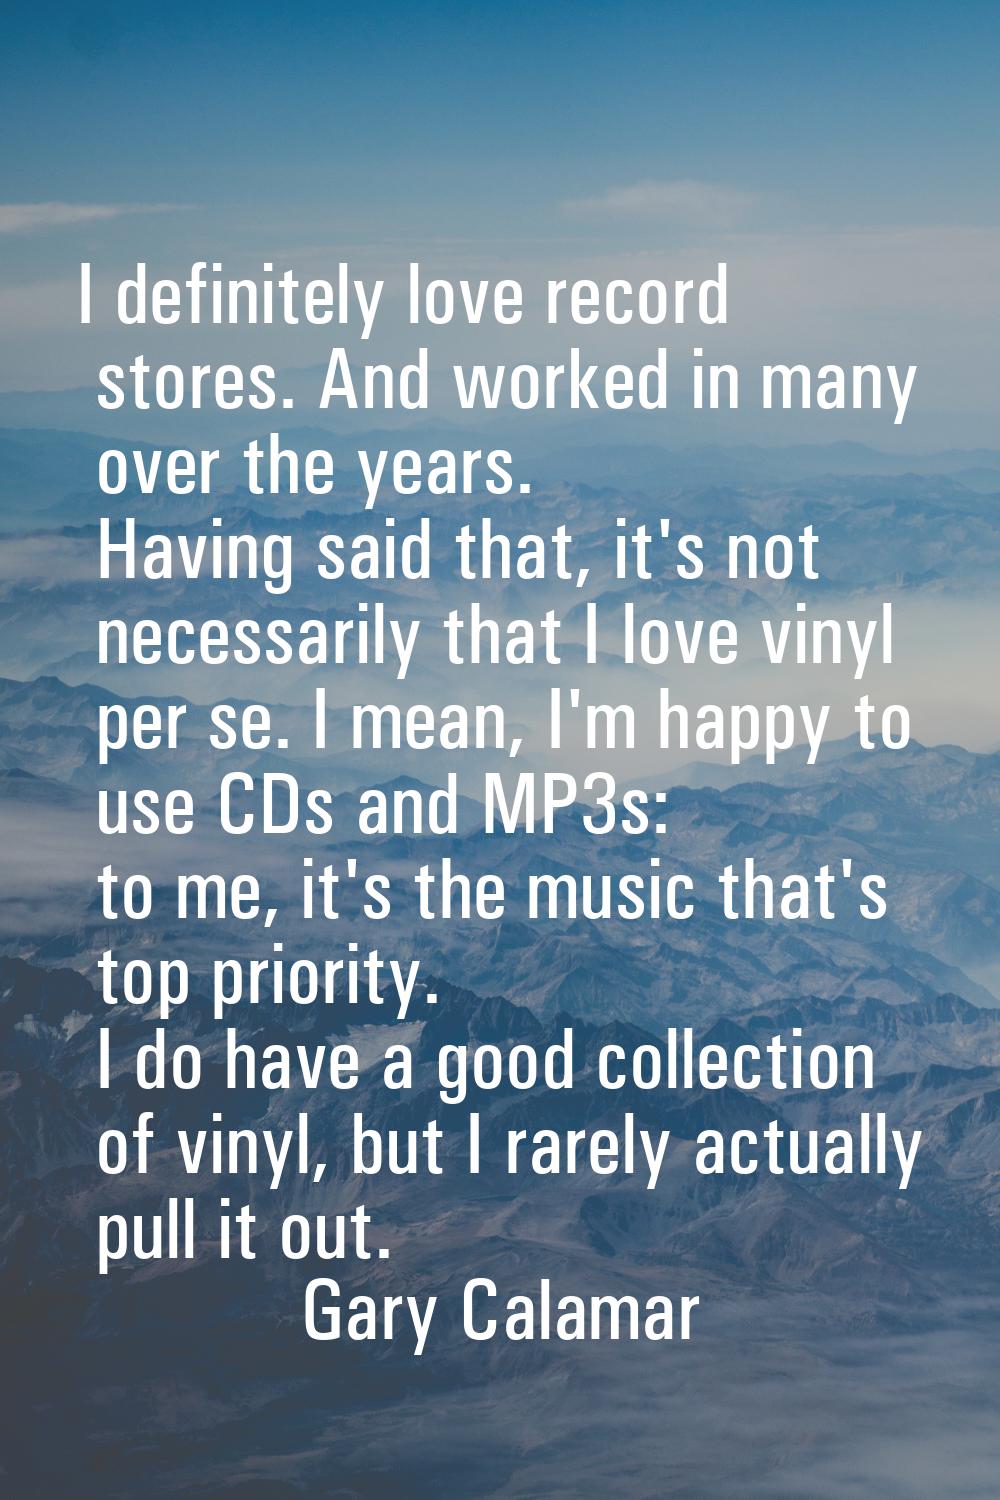 I definitely love record stores. And worked in many over the years. Having said that, it's not nece